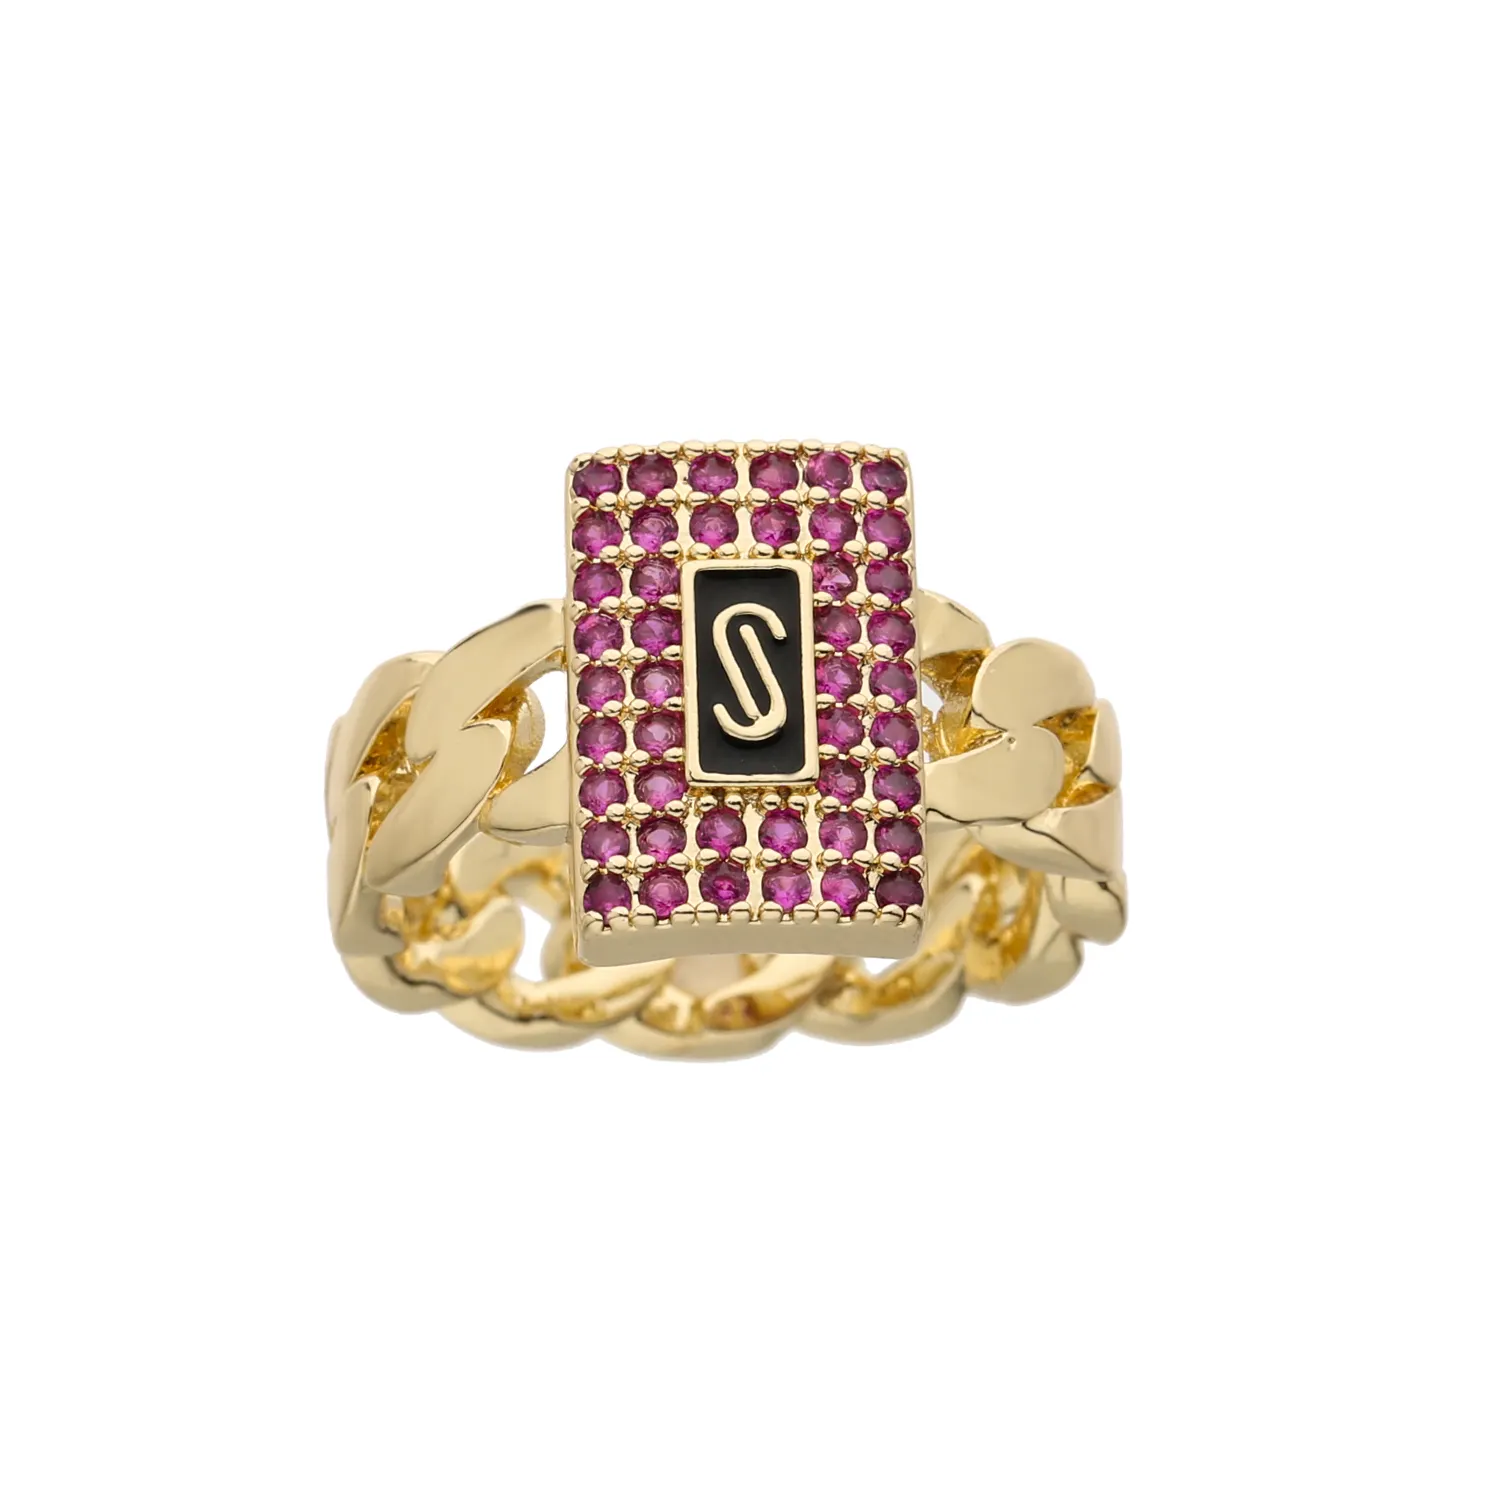 New Fashion 14k Gold Plated Stainless Steel Jewelry S Cube Gift Fashion Ring